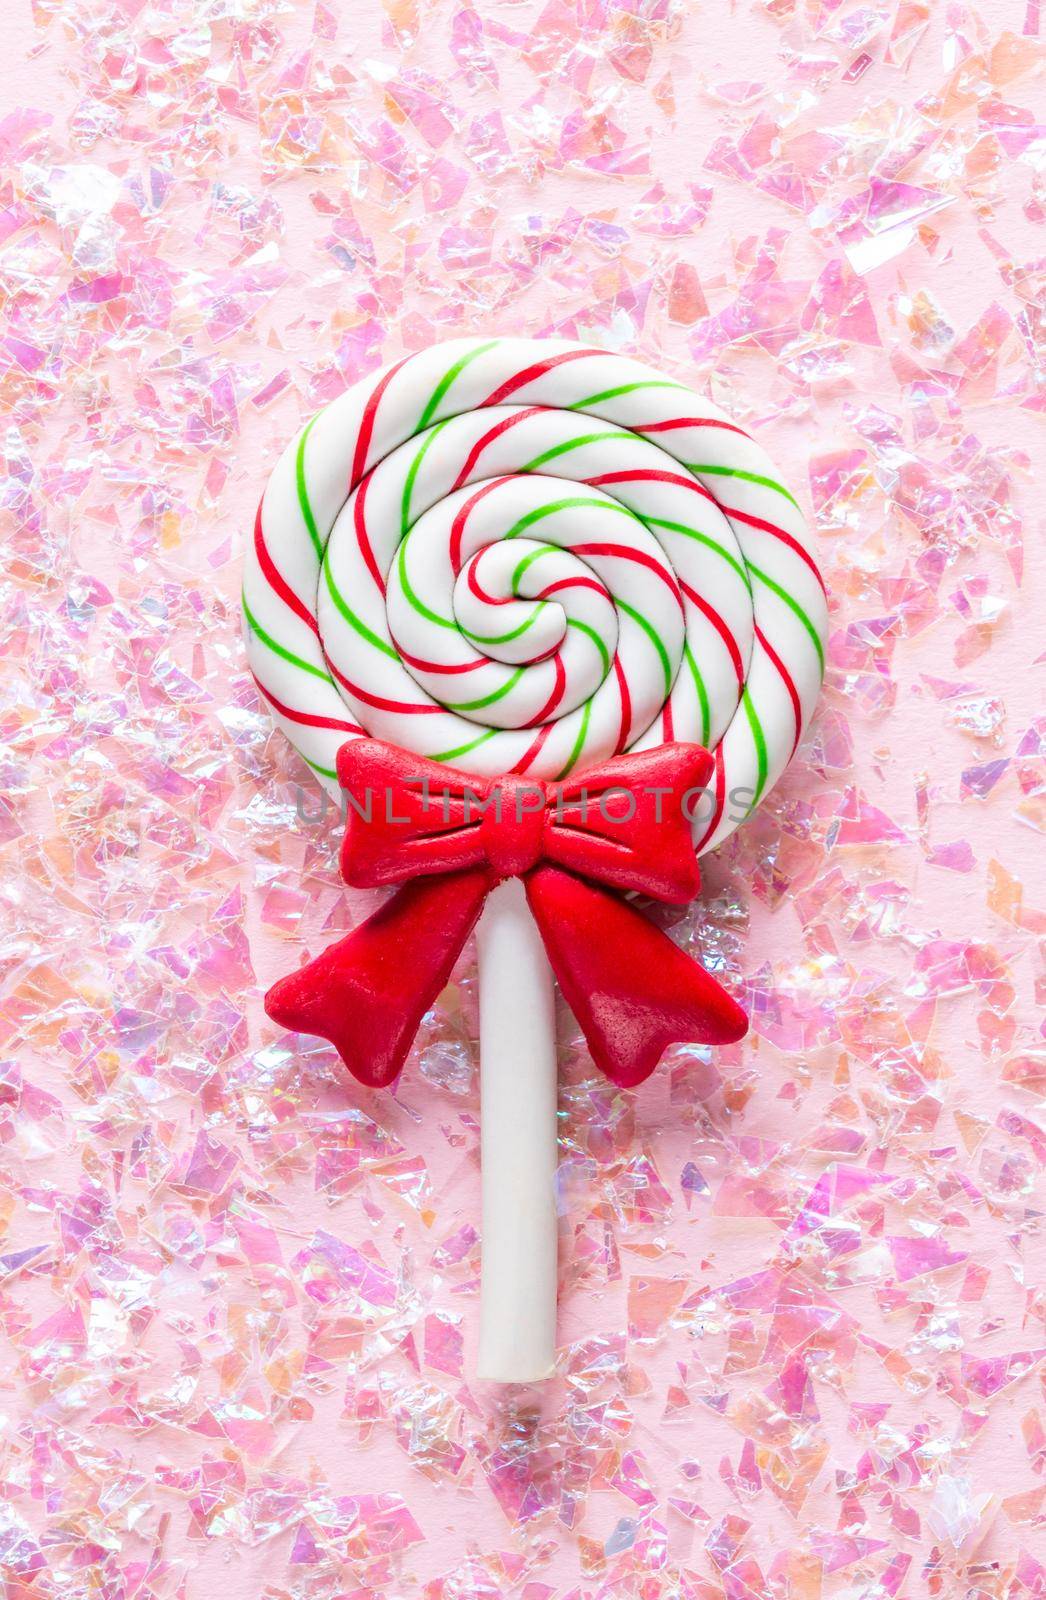 Colorful Sweet Lollipop For Children On pink Background